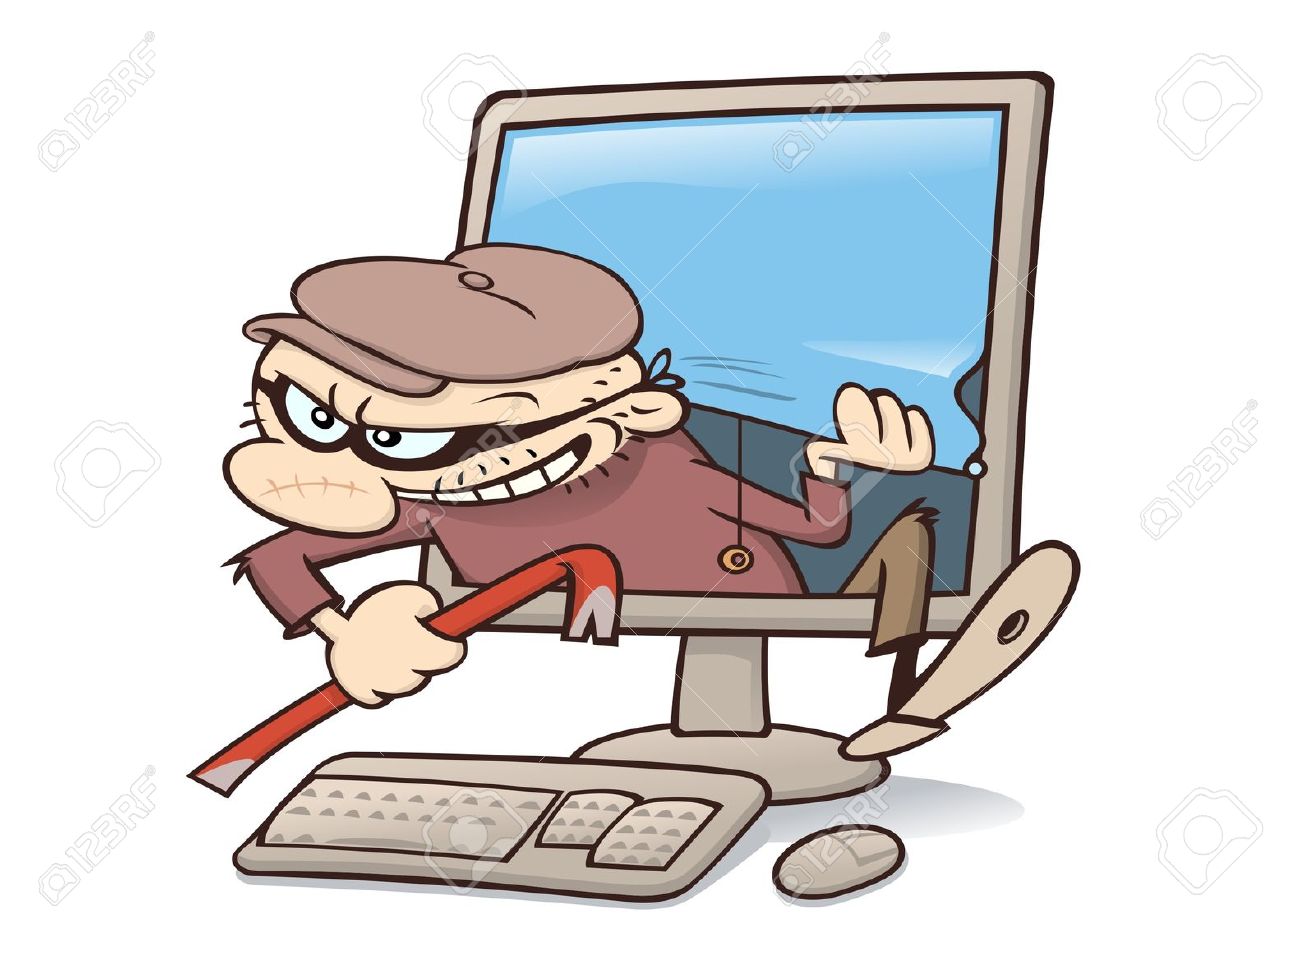 computer hacking clipart - photo #4